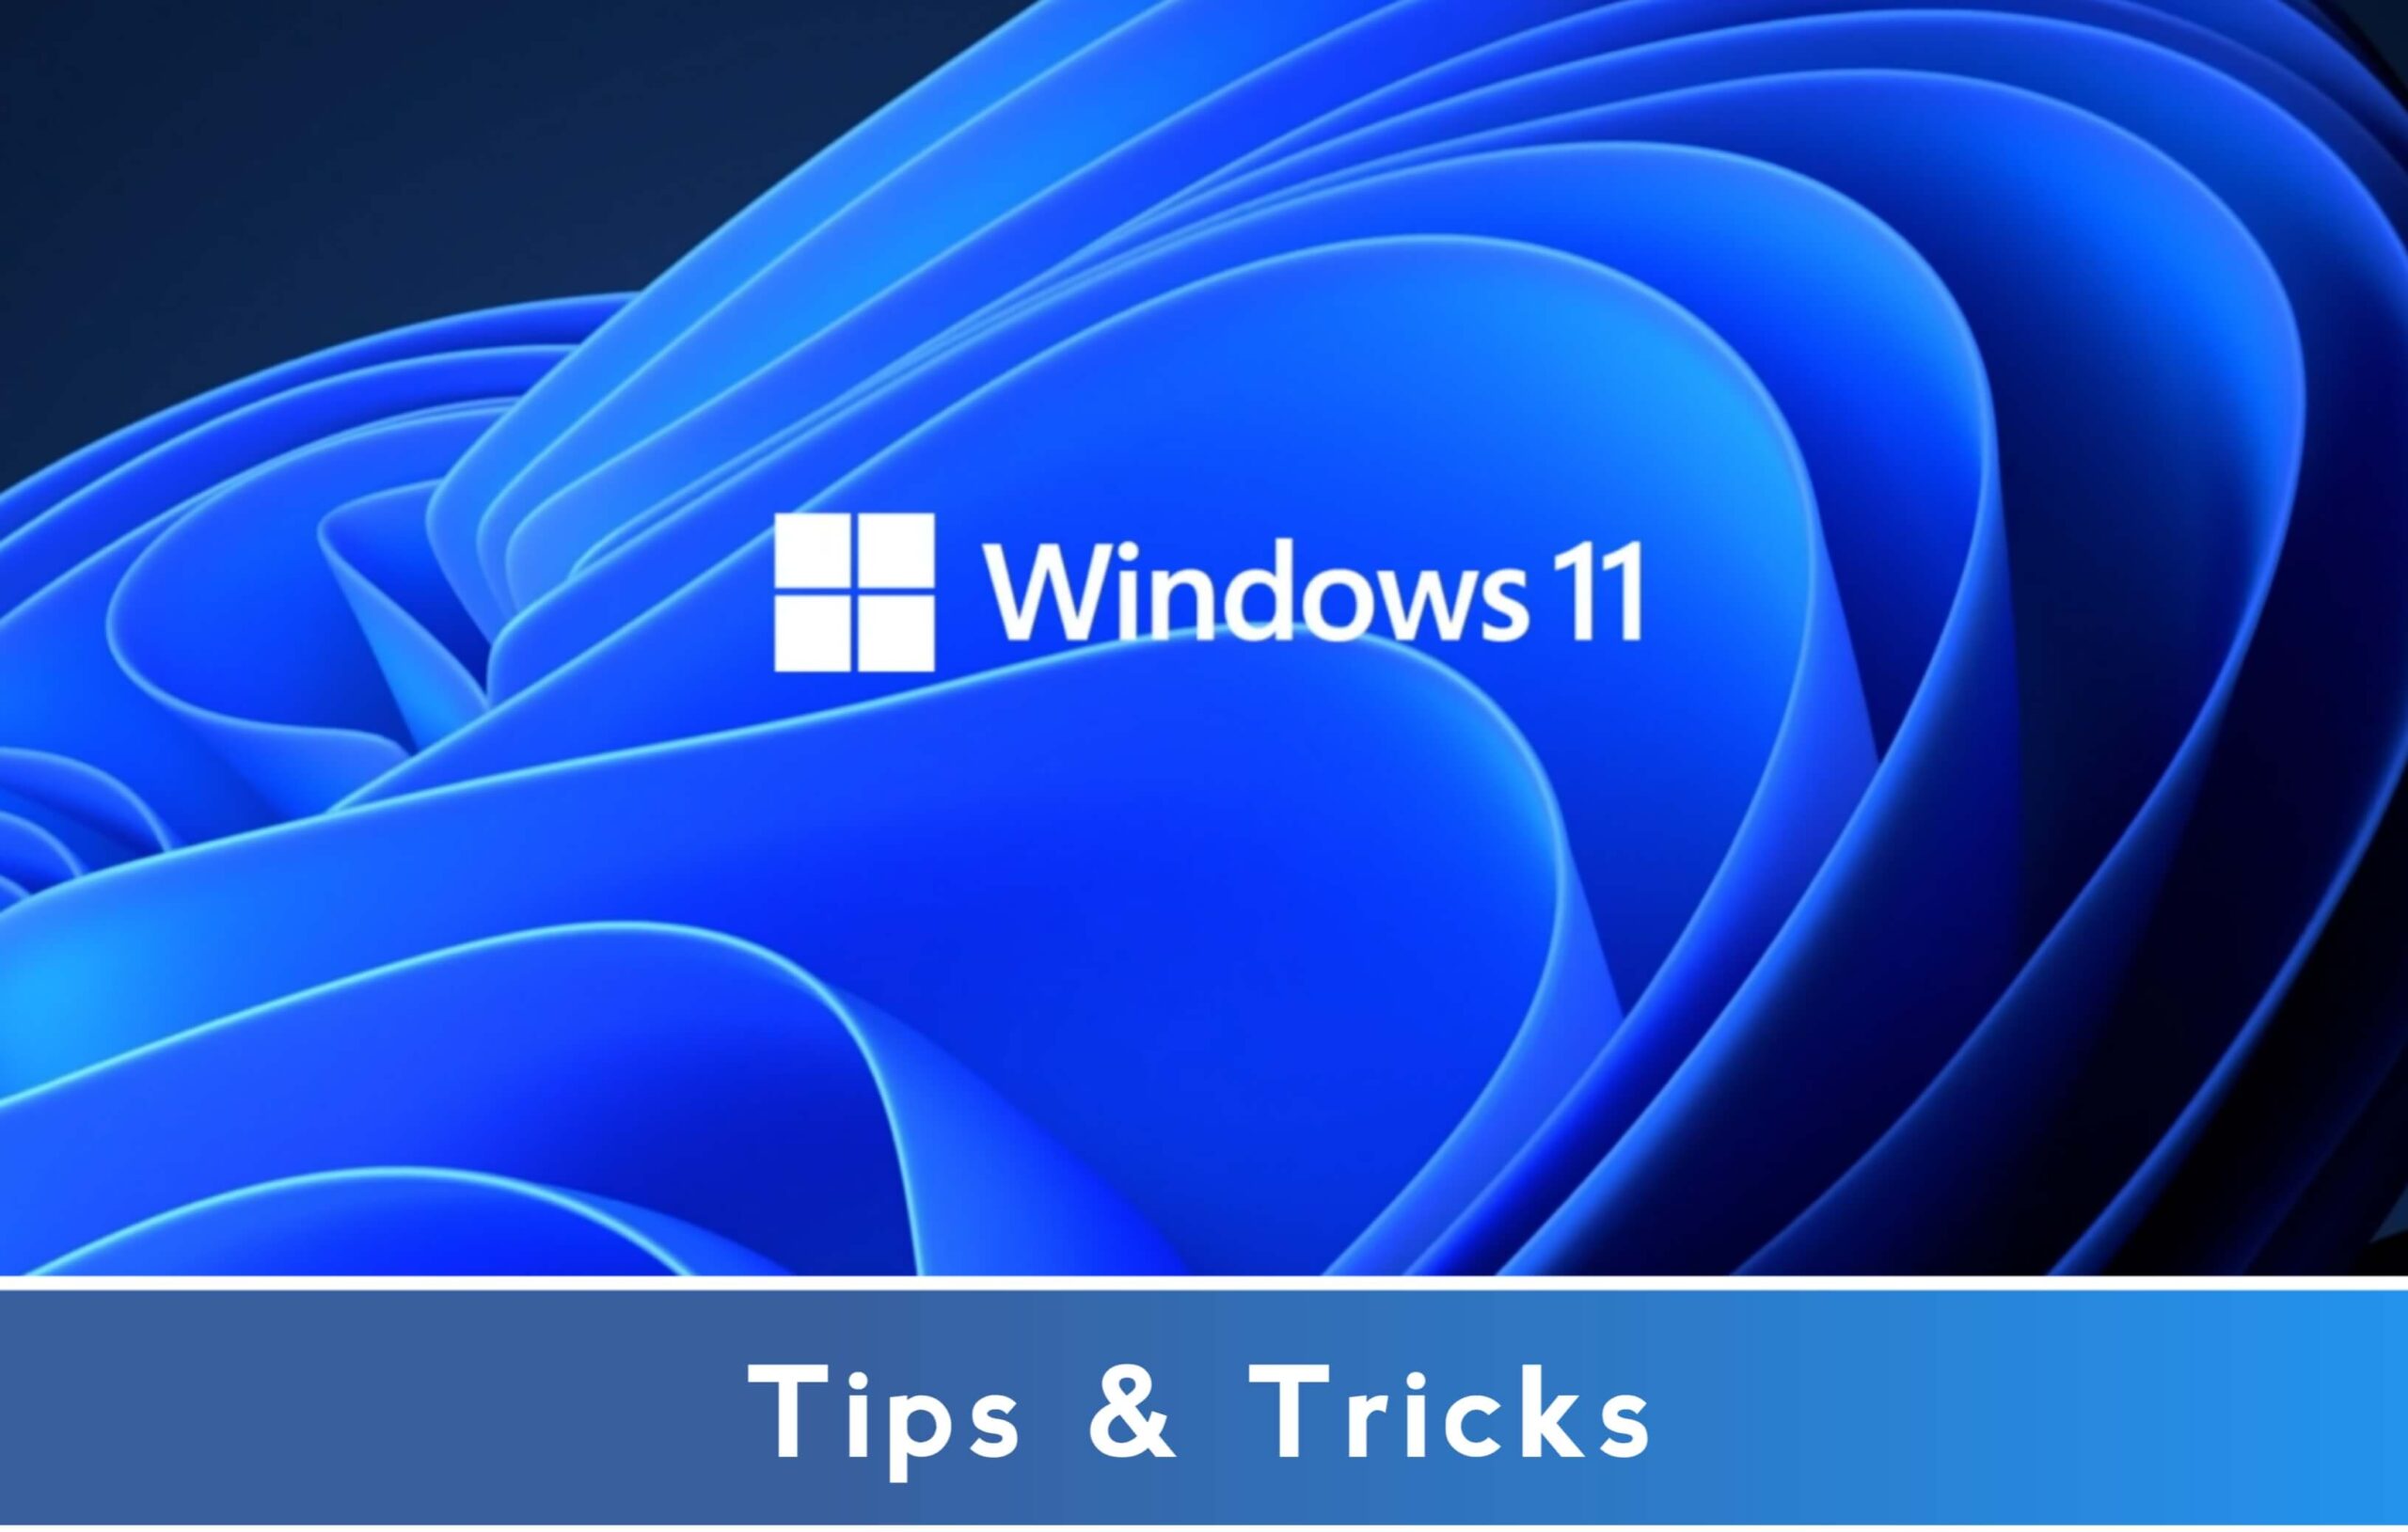 How to use Windows 11 tips and tricks in hindi